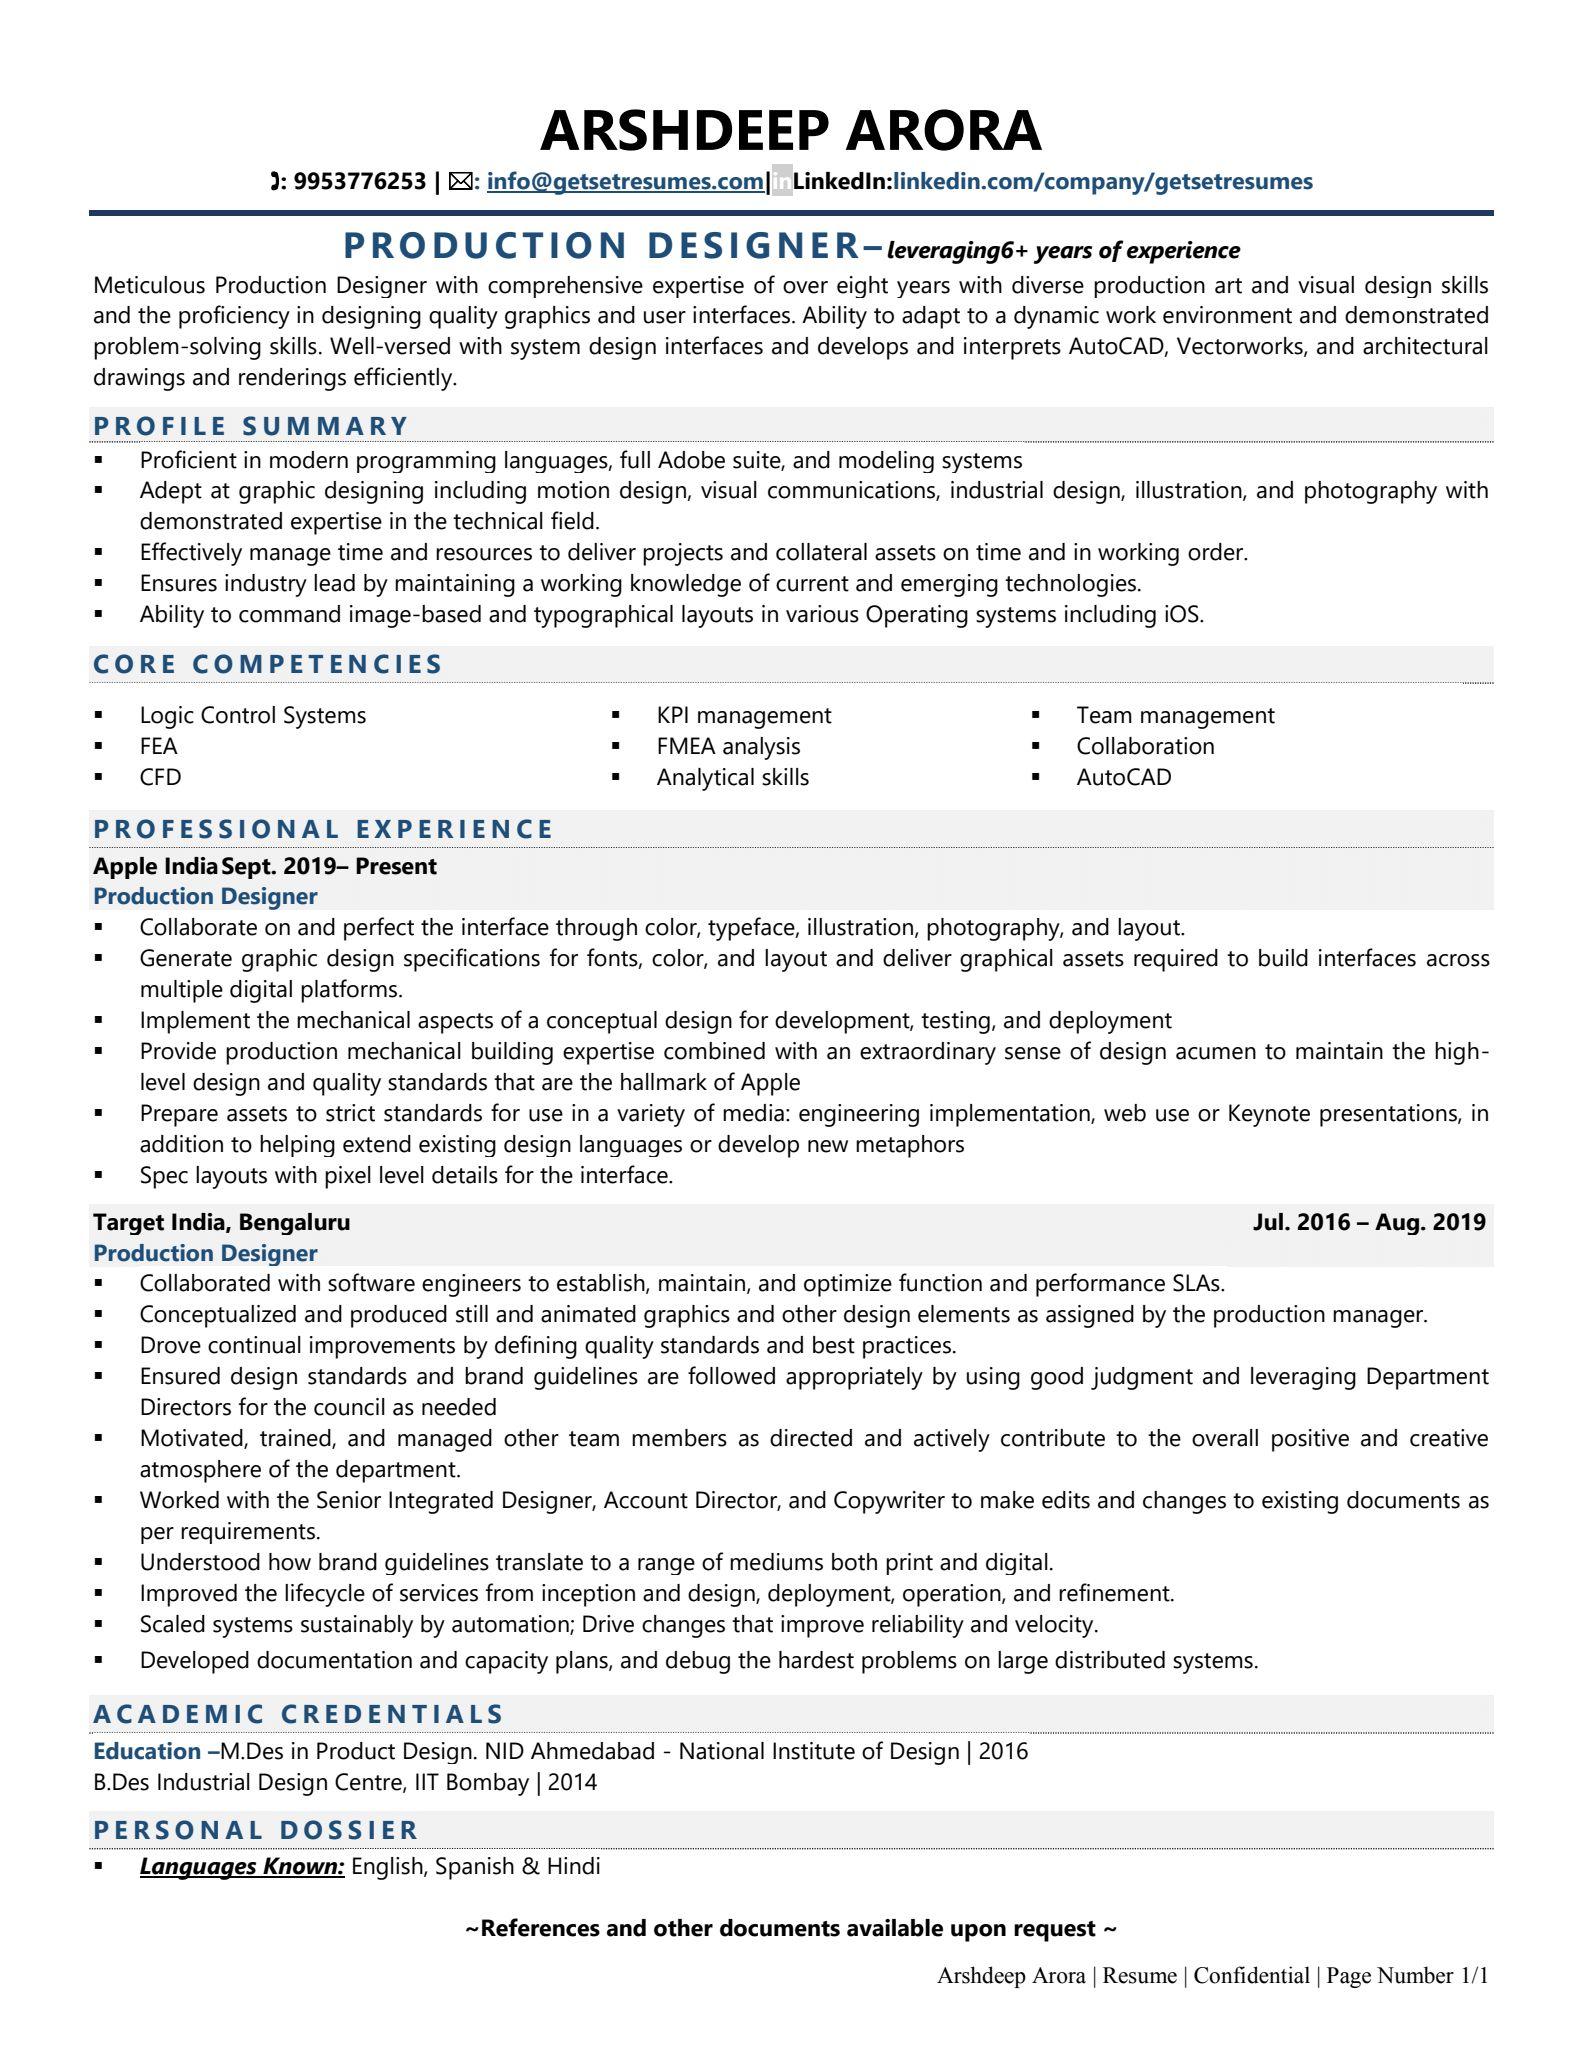 Production Designer - Resume Example & Template